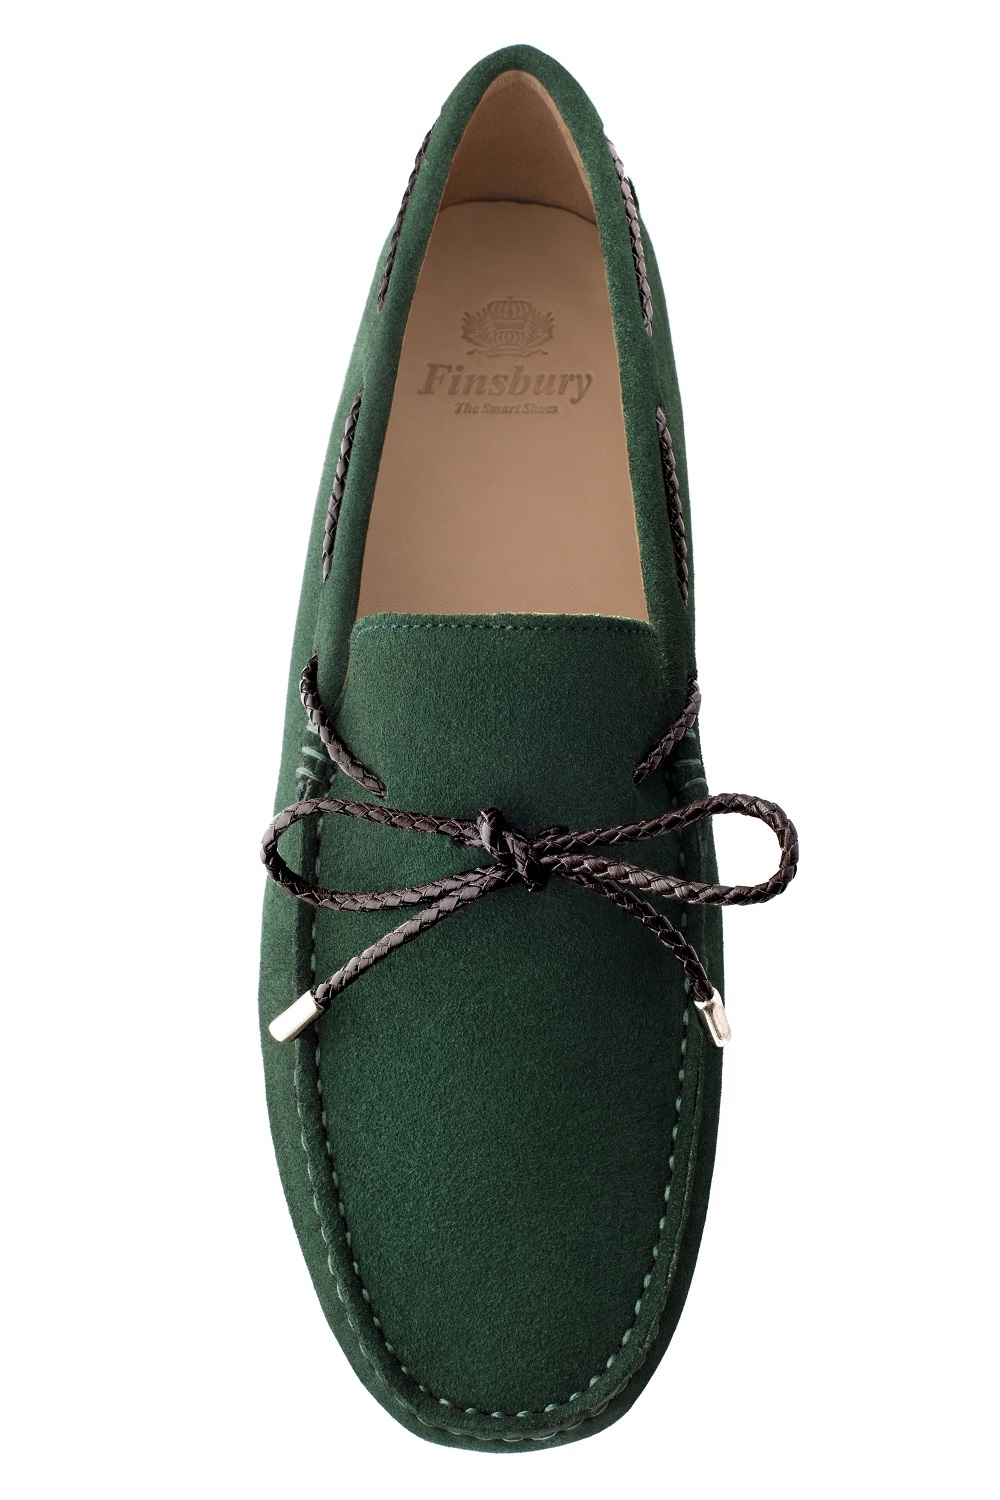 CANCUN Green suede Men's Loafers - Finsbury Shoes